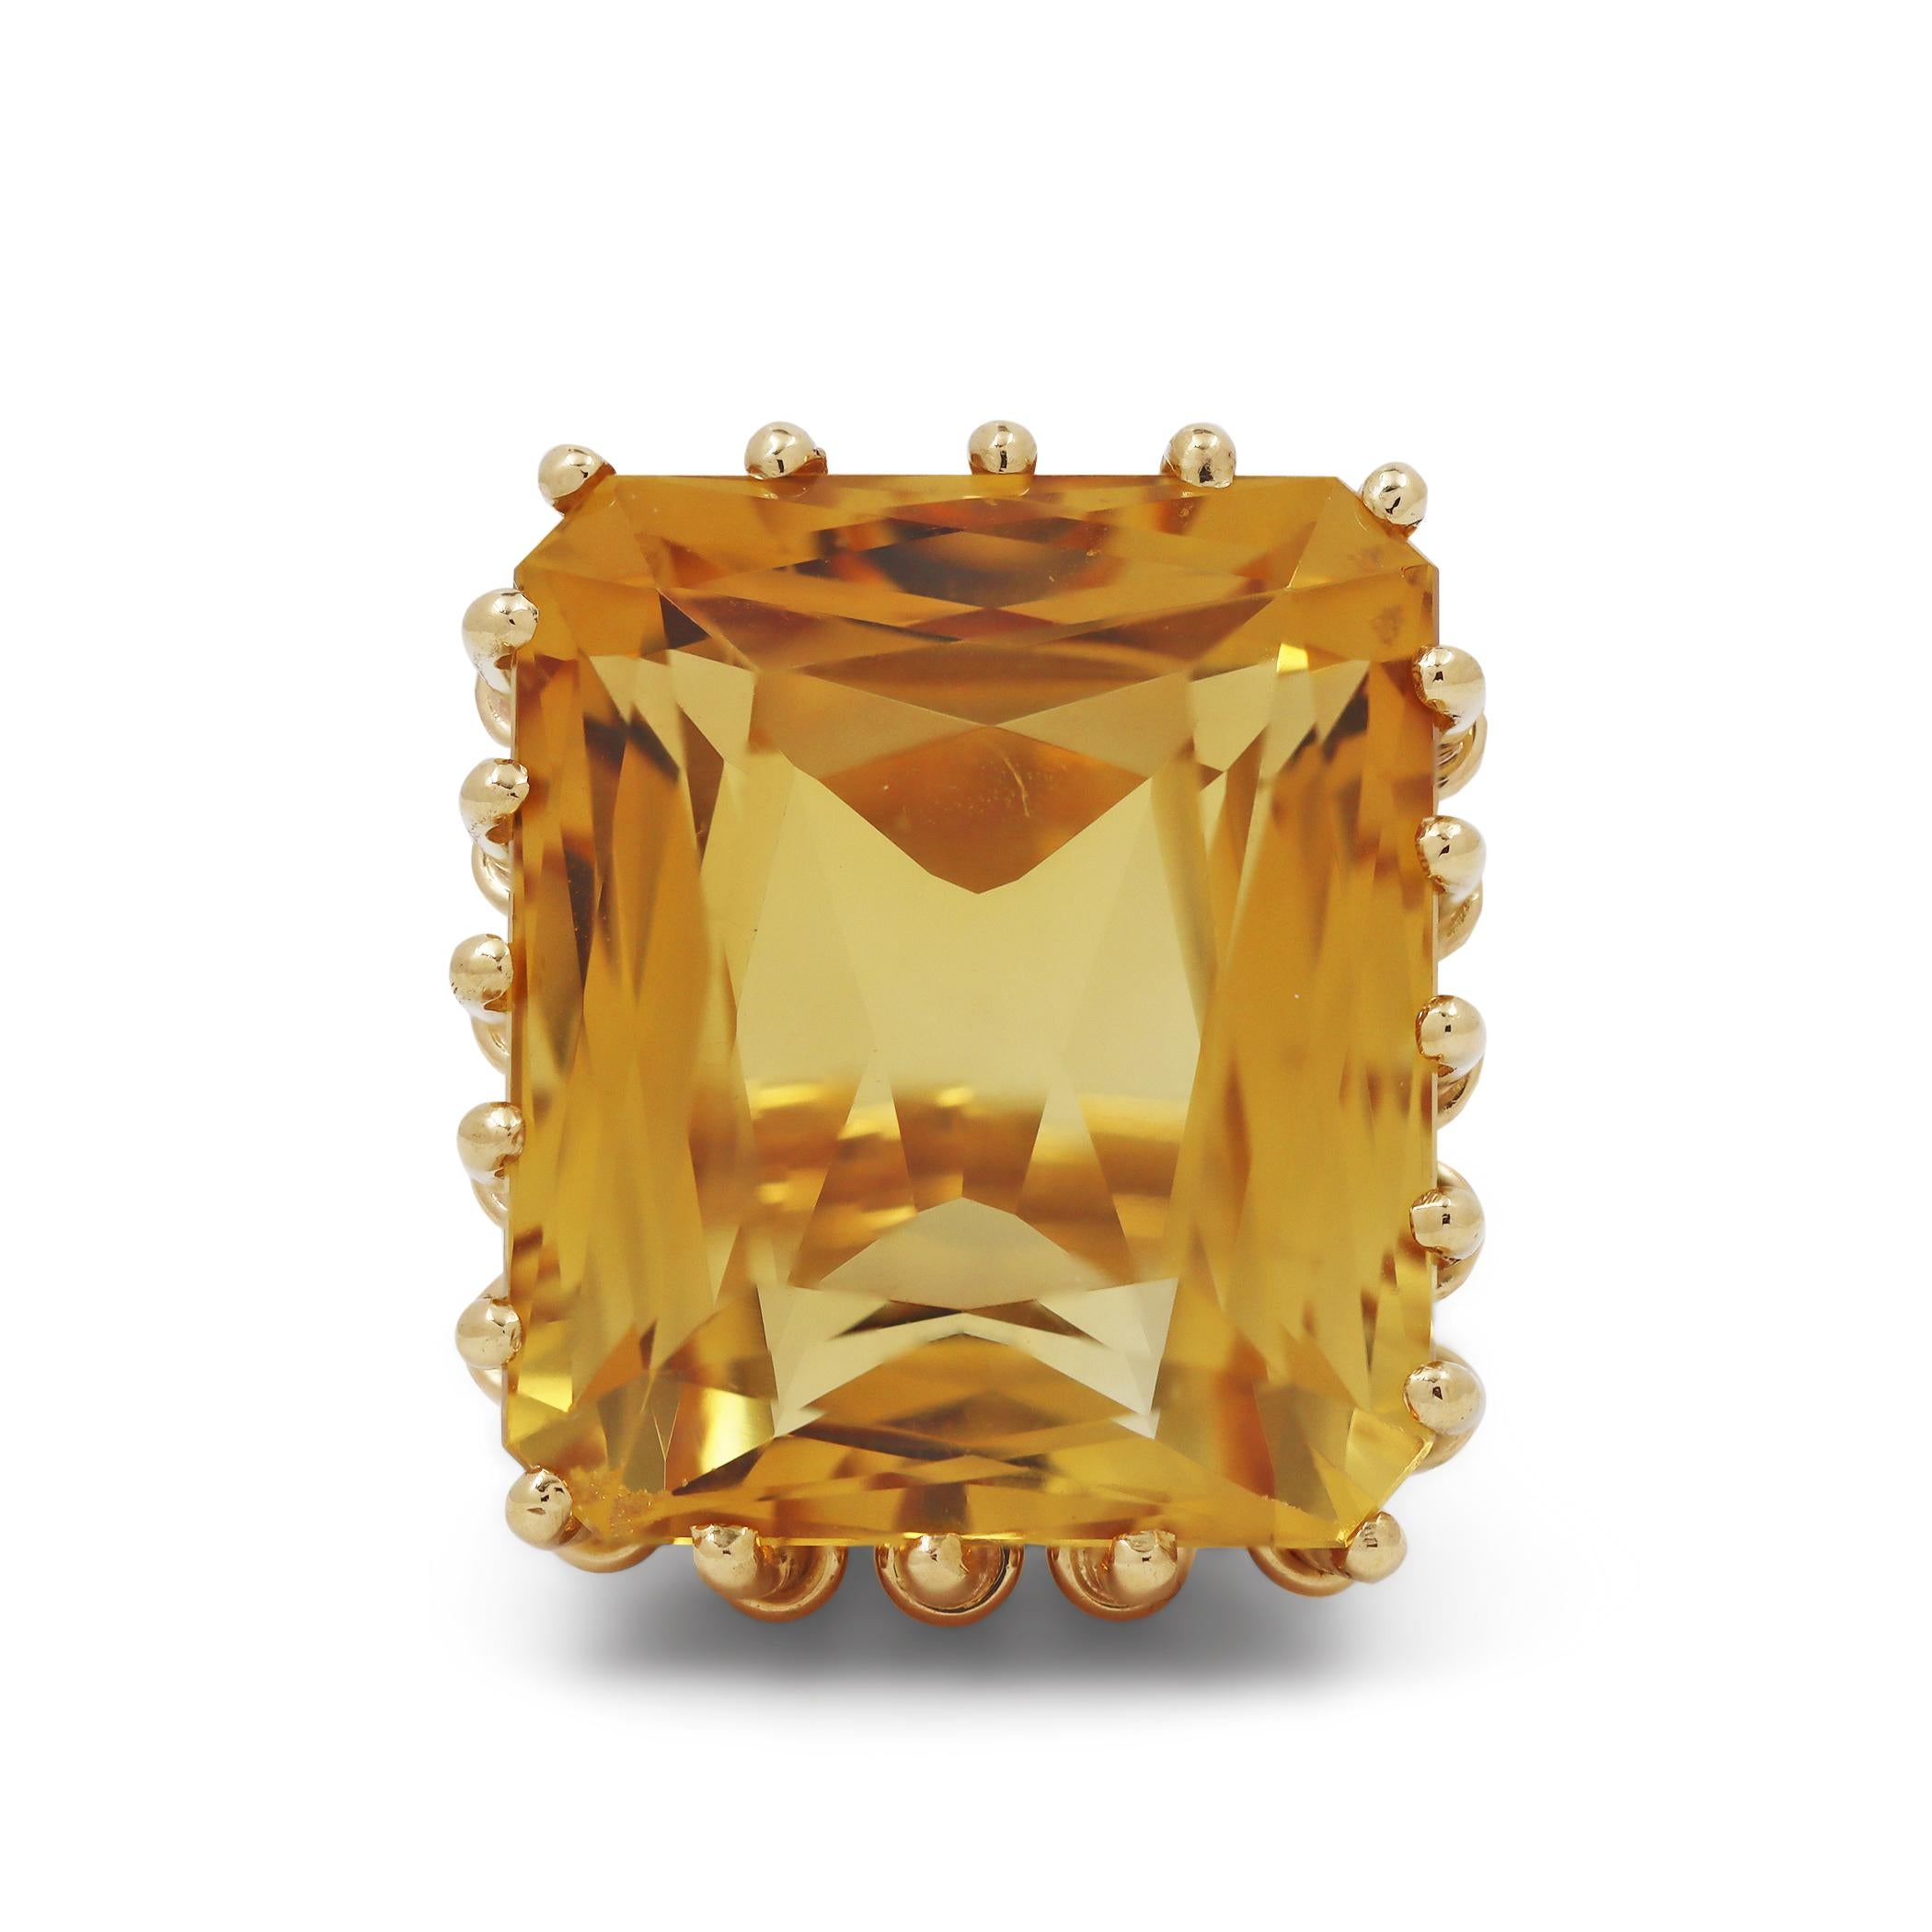 Make a statement with this striking cocktail ring. A uniquely designed 18 karat yellow gold basket setting boldly embraces an orangey-yellow rectangular faceted citrine of approximately 38 carats and measuring 22.9mm x 19.7mm.  US size 7.  The ring